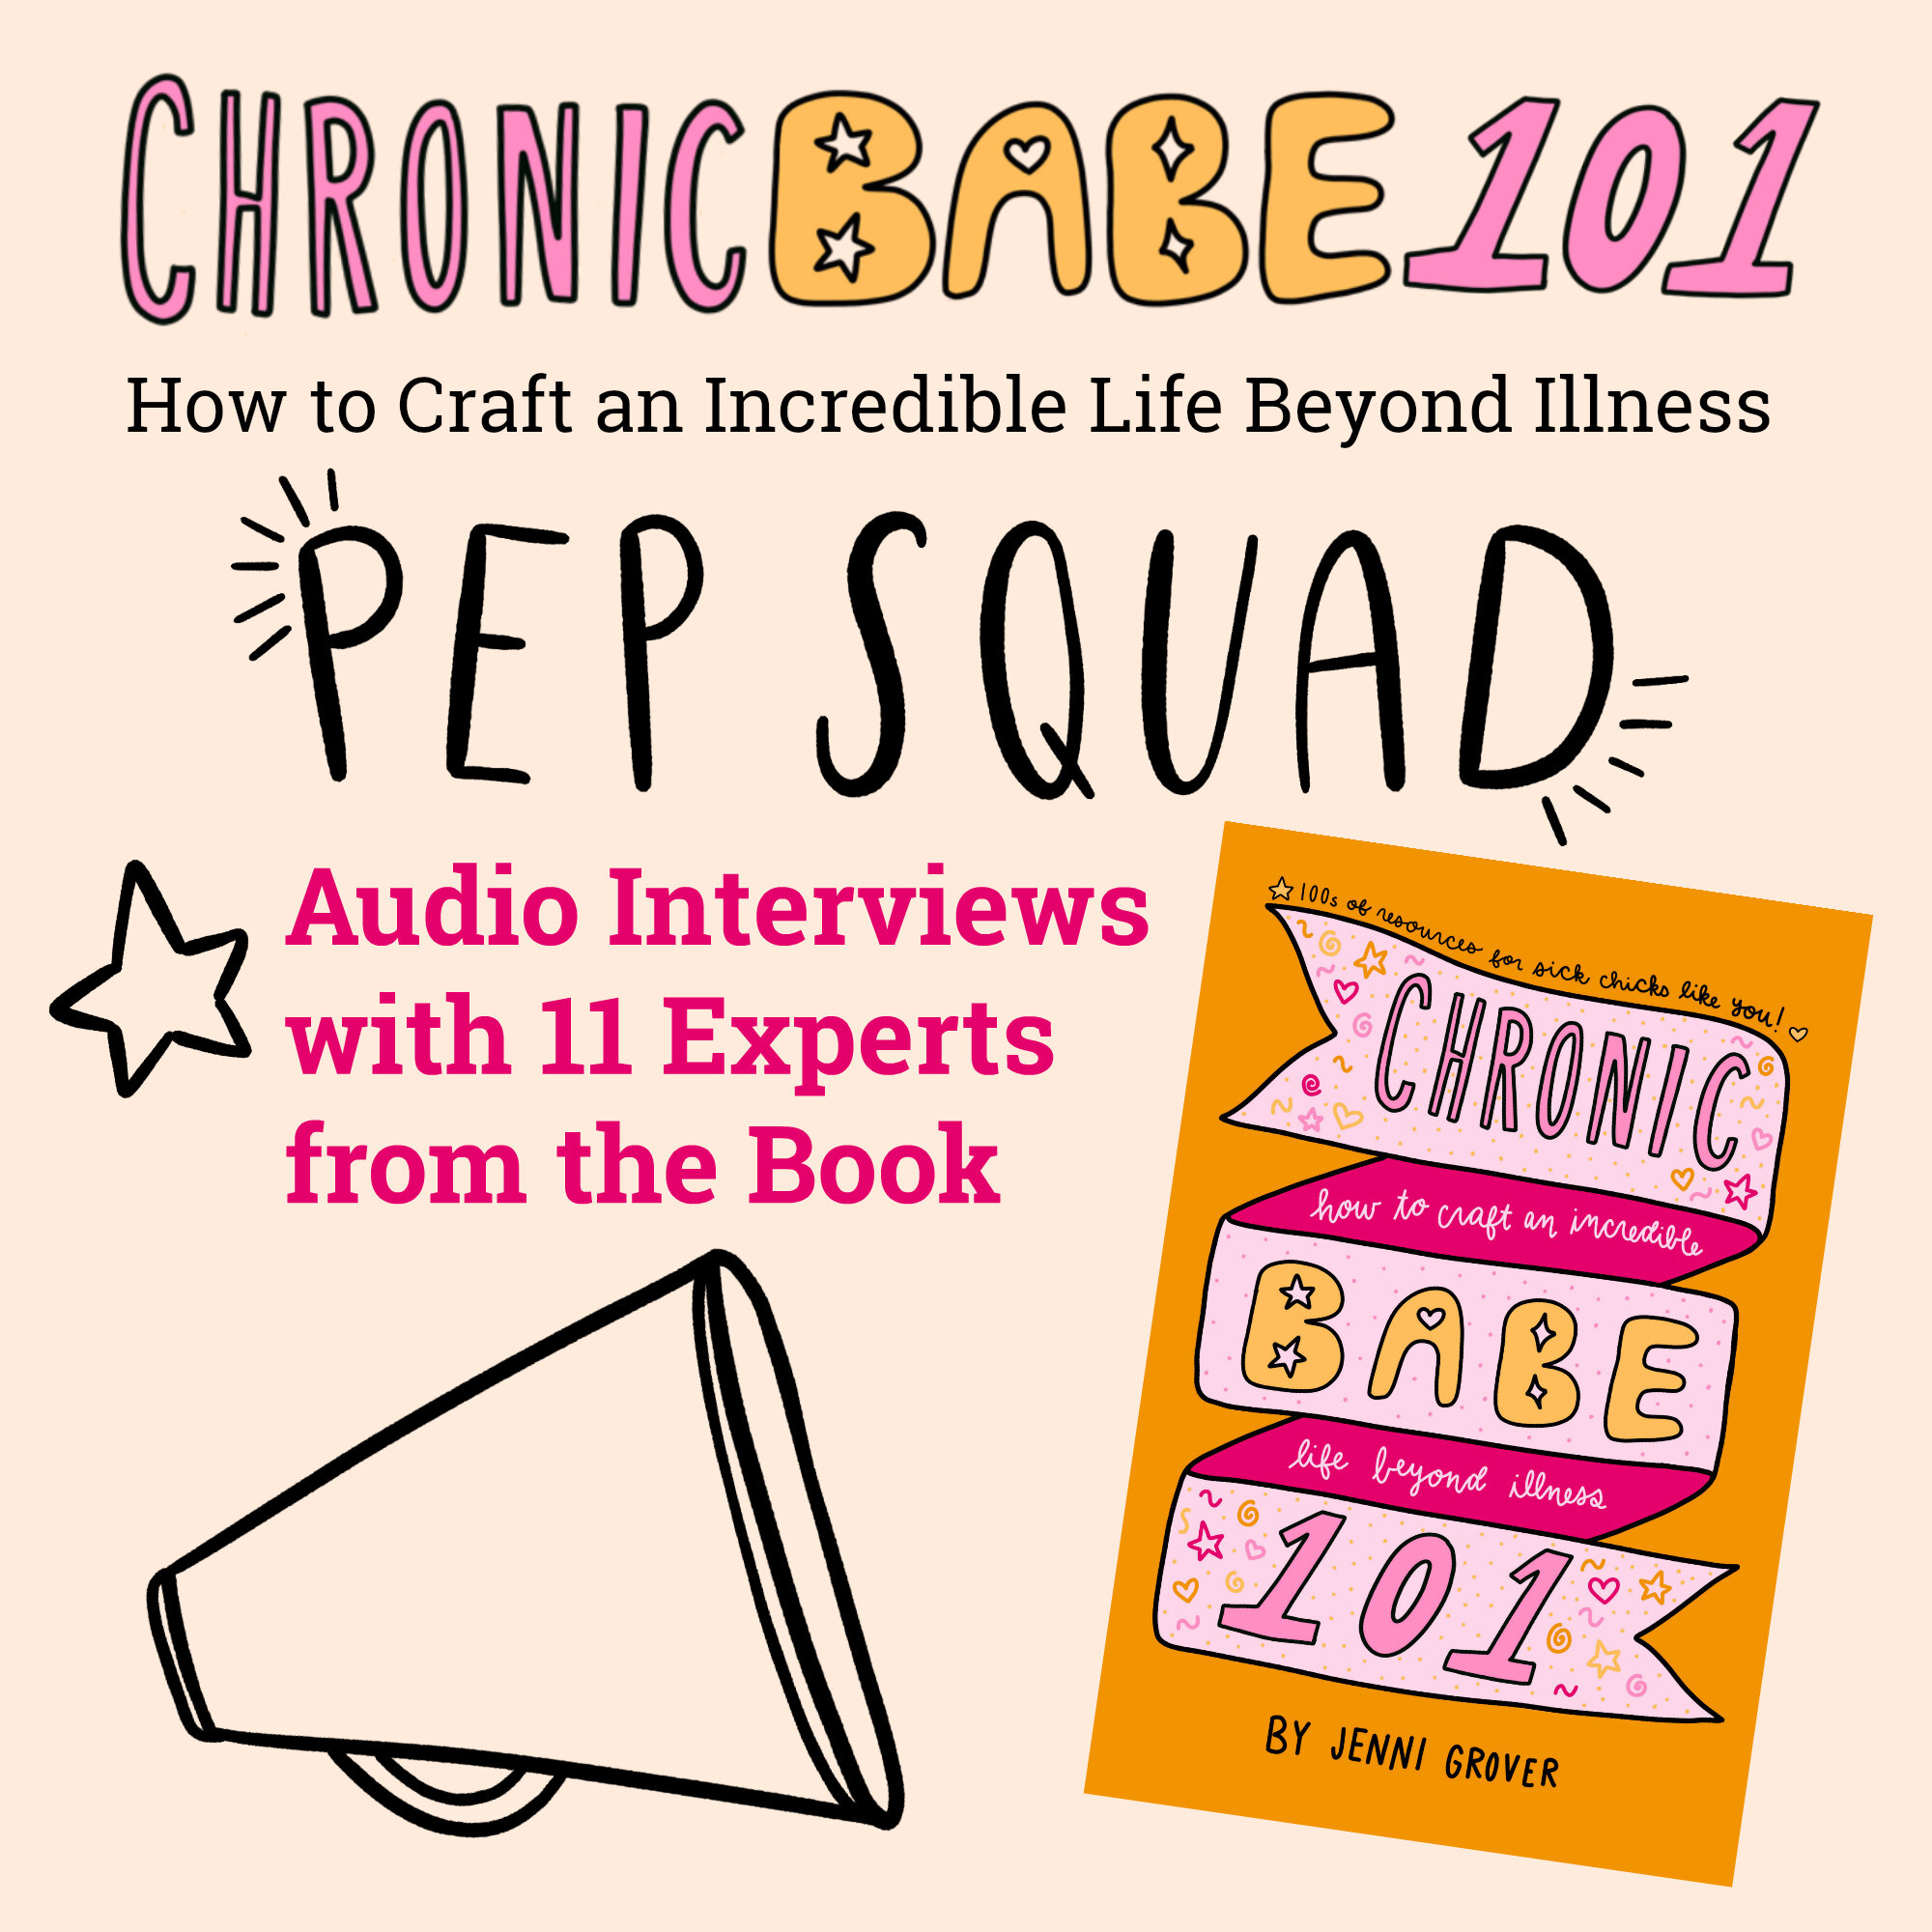 Fans of my book can listen to full audio interviews with 11 guest experts